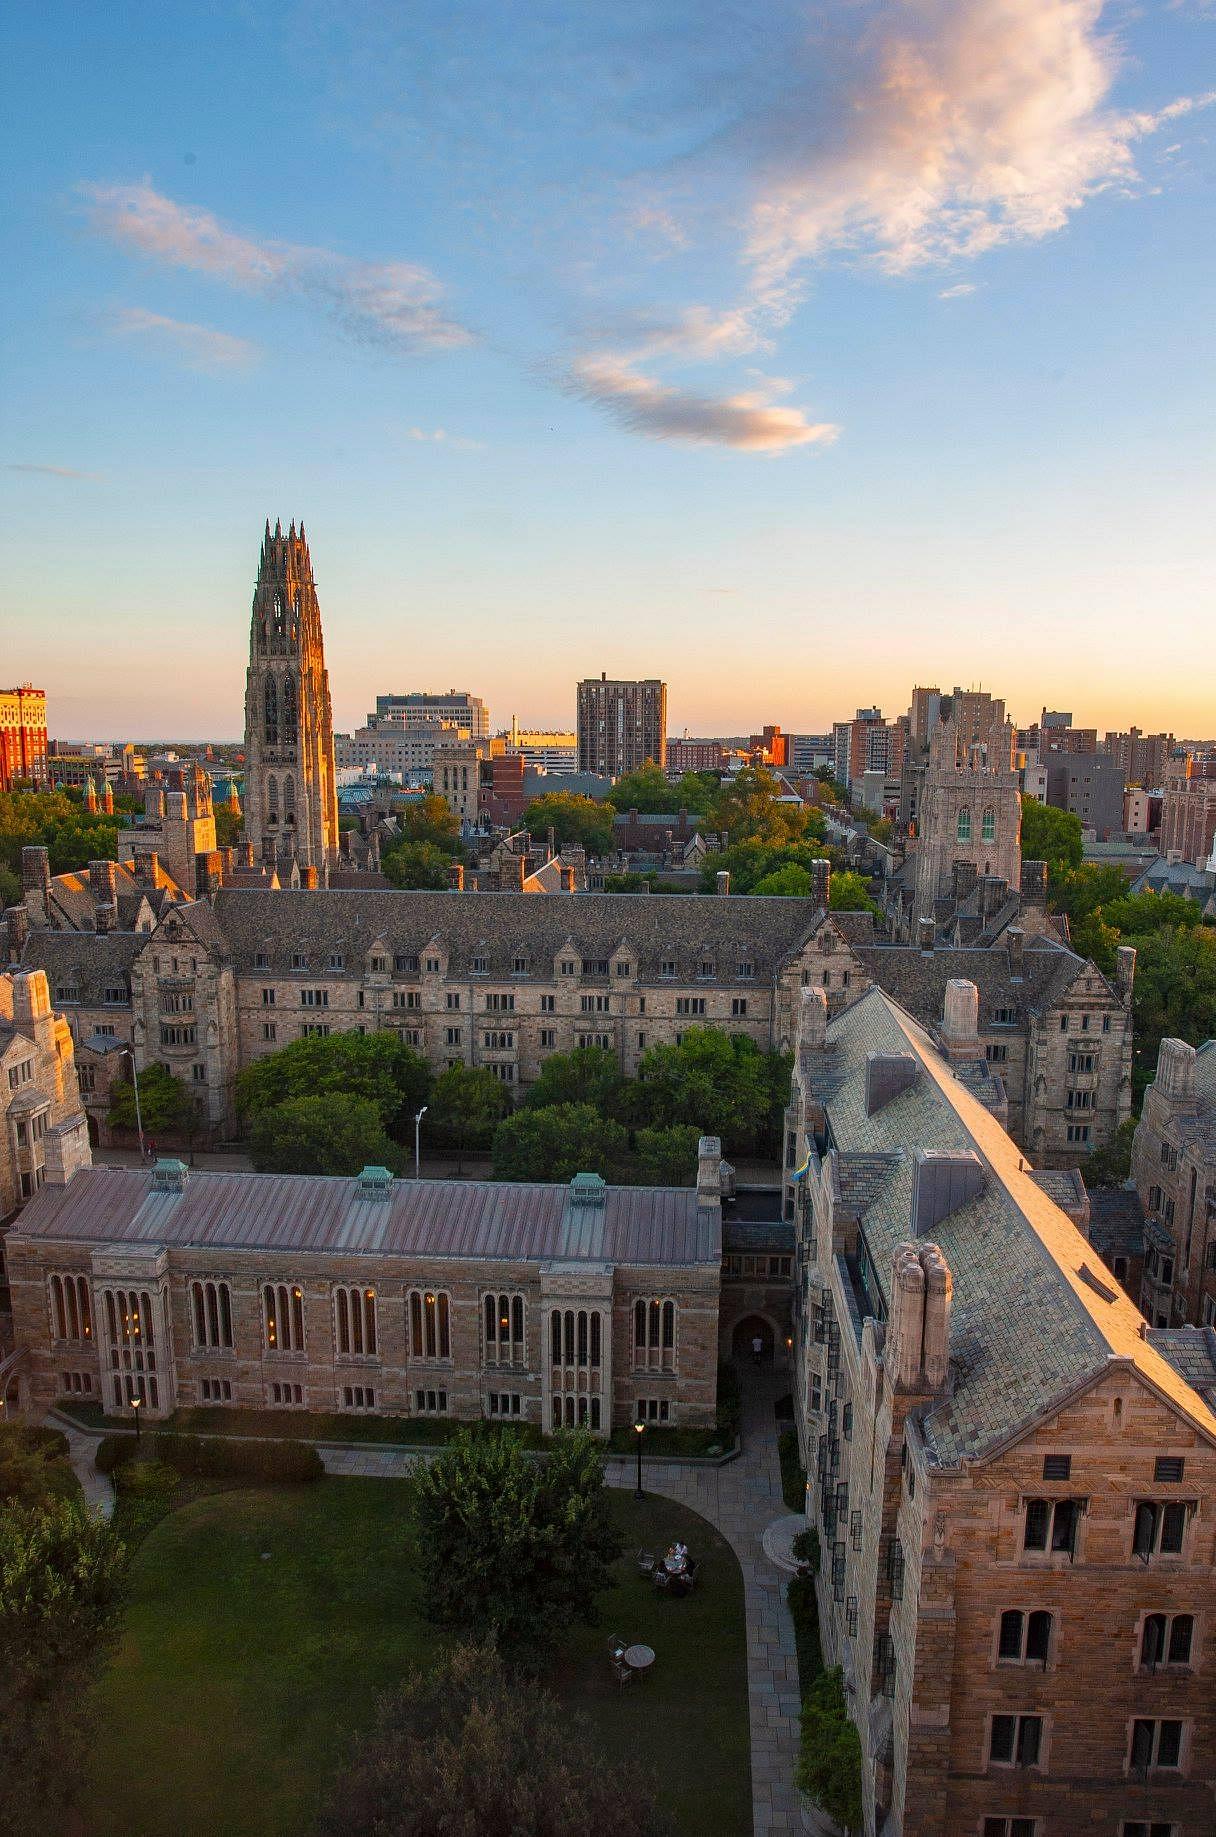 Yale University Admissions - Top Tier Admissions